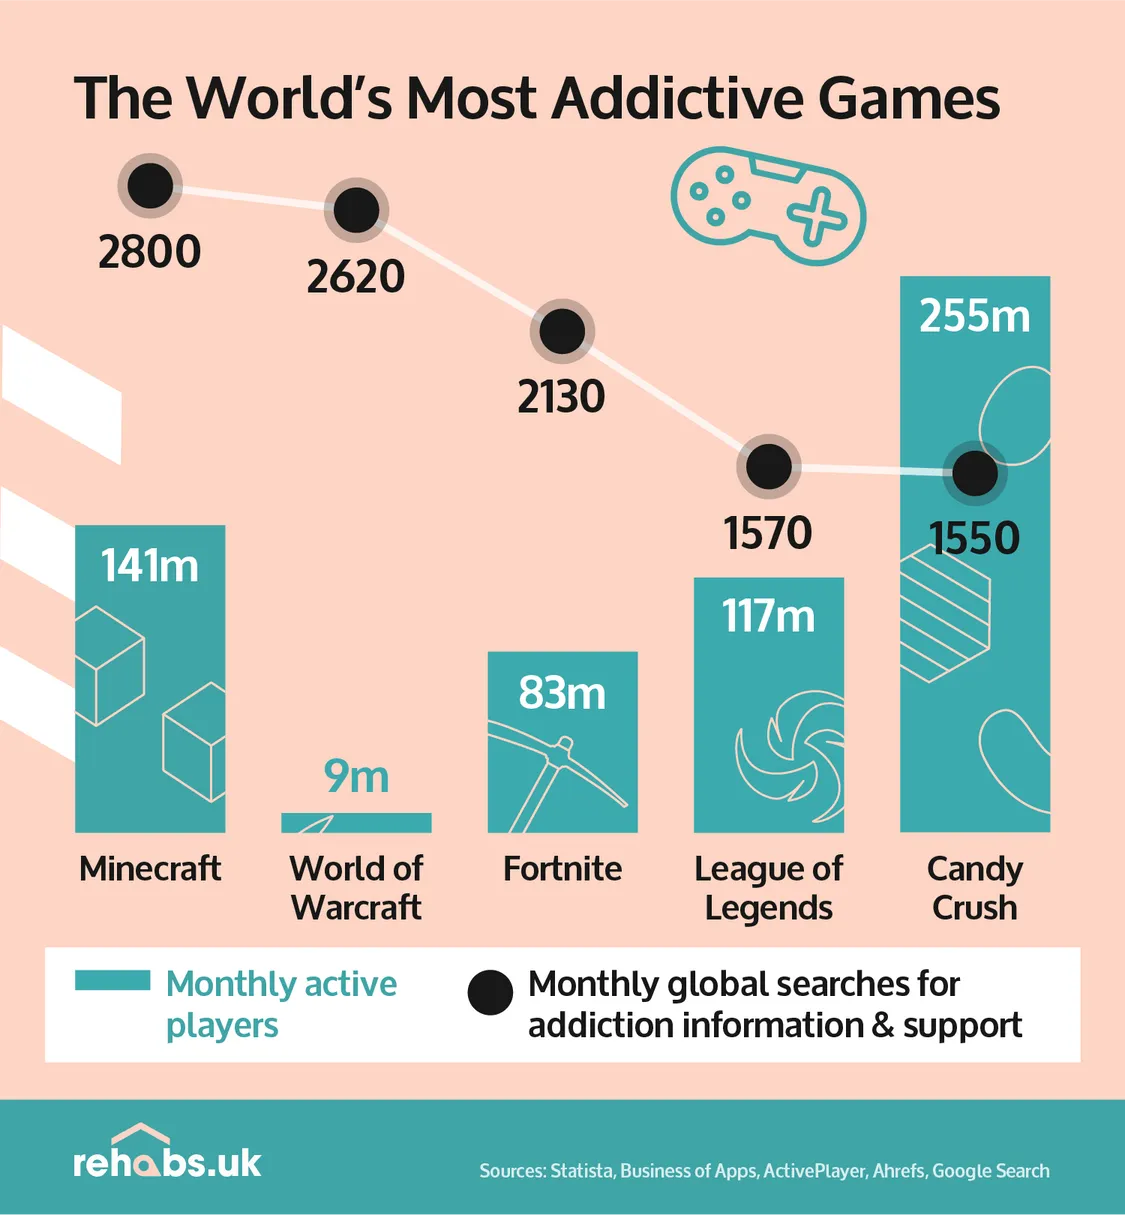 Infographic showing the worlds most addictive video games with Candy Crush having over 255 million monthly active players, League of Legends with 117 million, Fortnite with 83 million, World of Warcraft with 9 million and finally Minecraft with 141 million active monthly players.